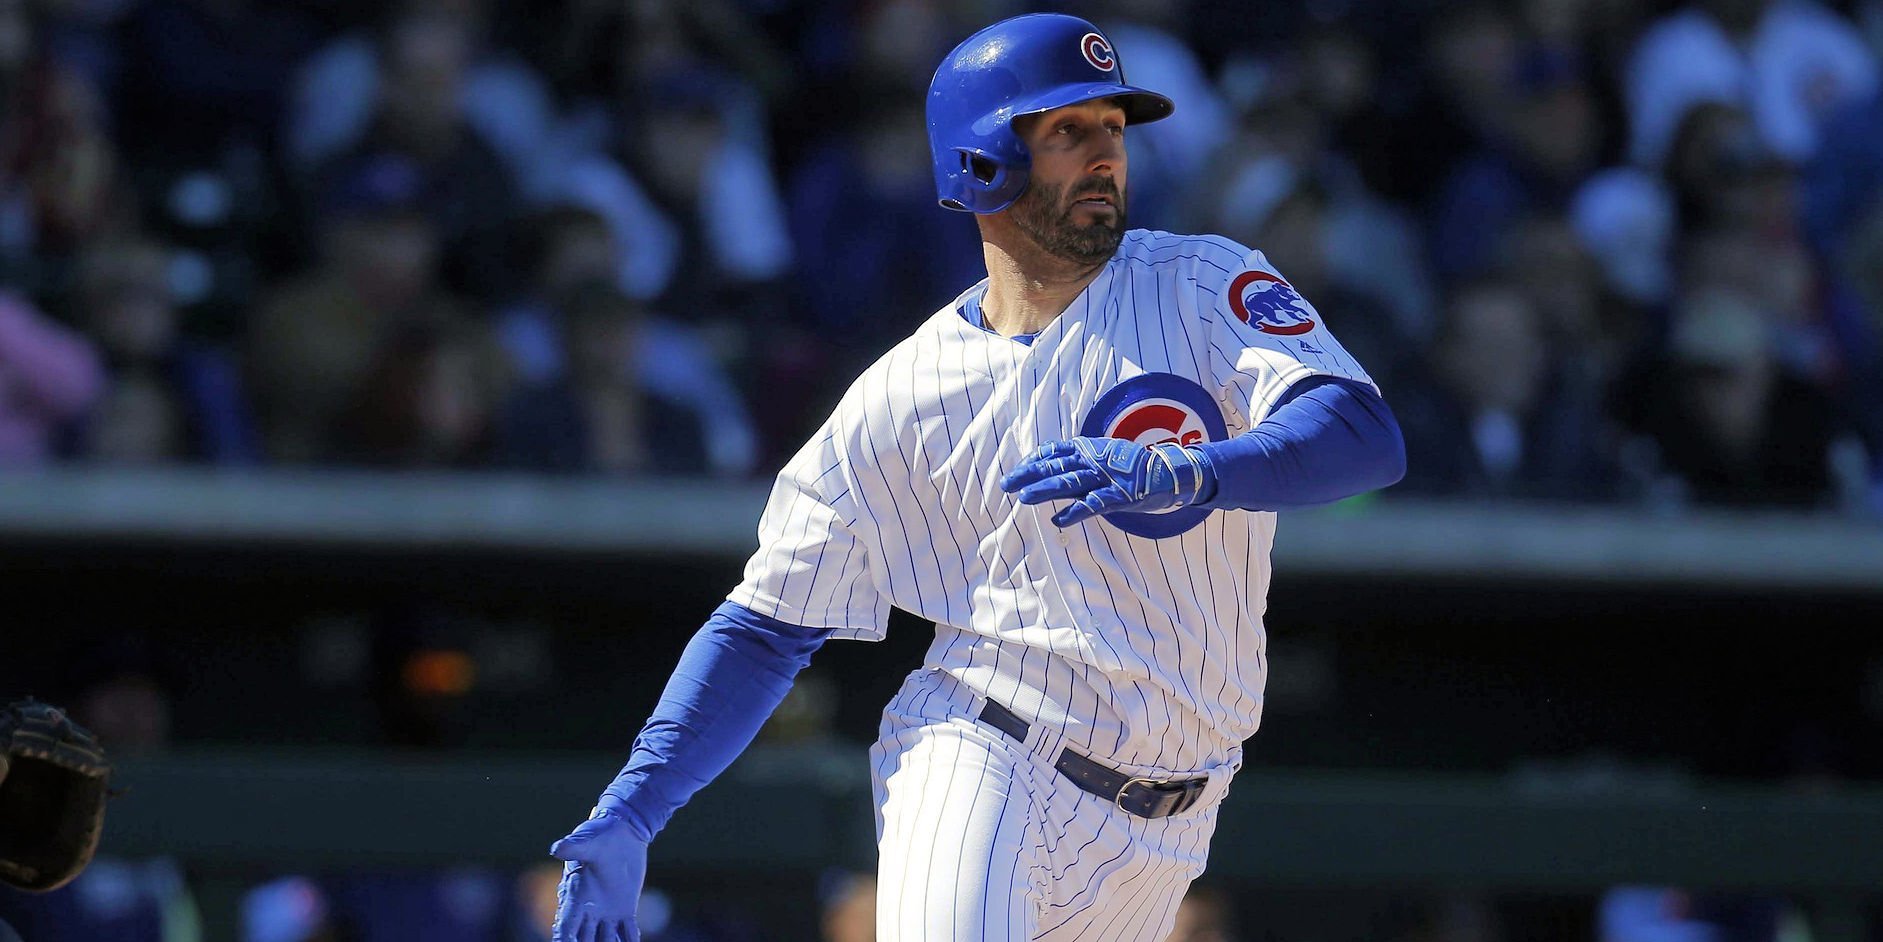 Cubs Odds and Ends: The Descalso debacle, Zo and a halo, End of innocence with Ross